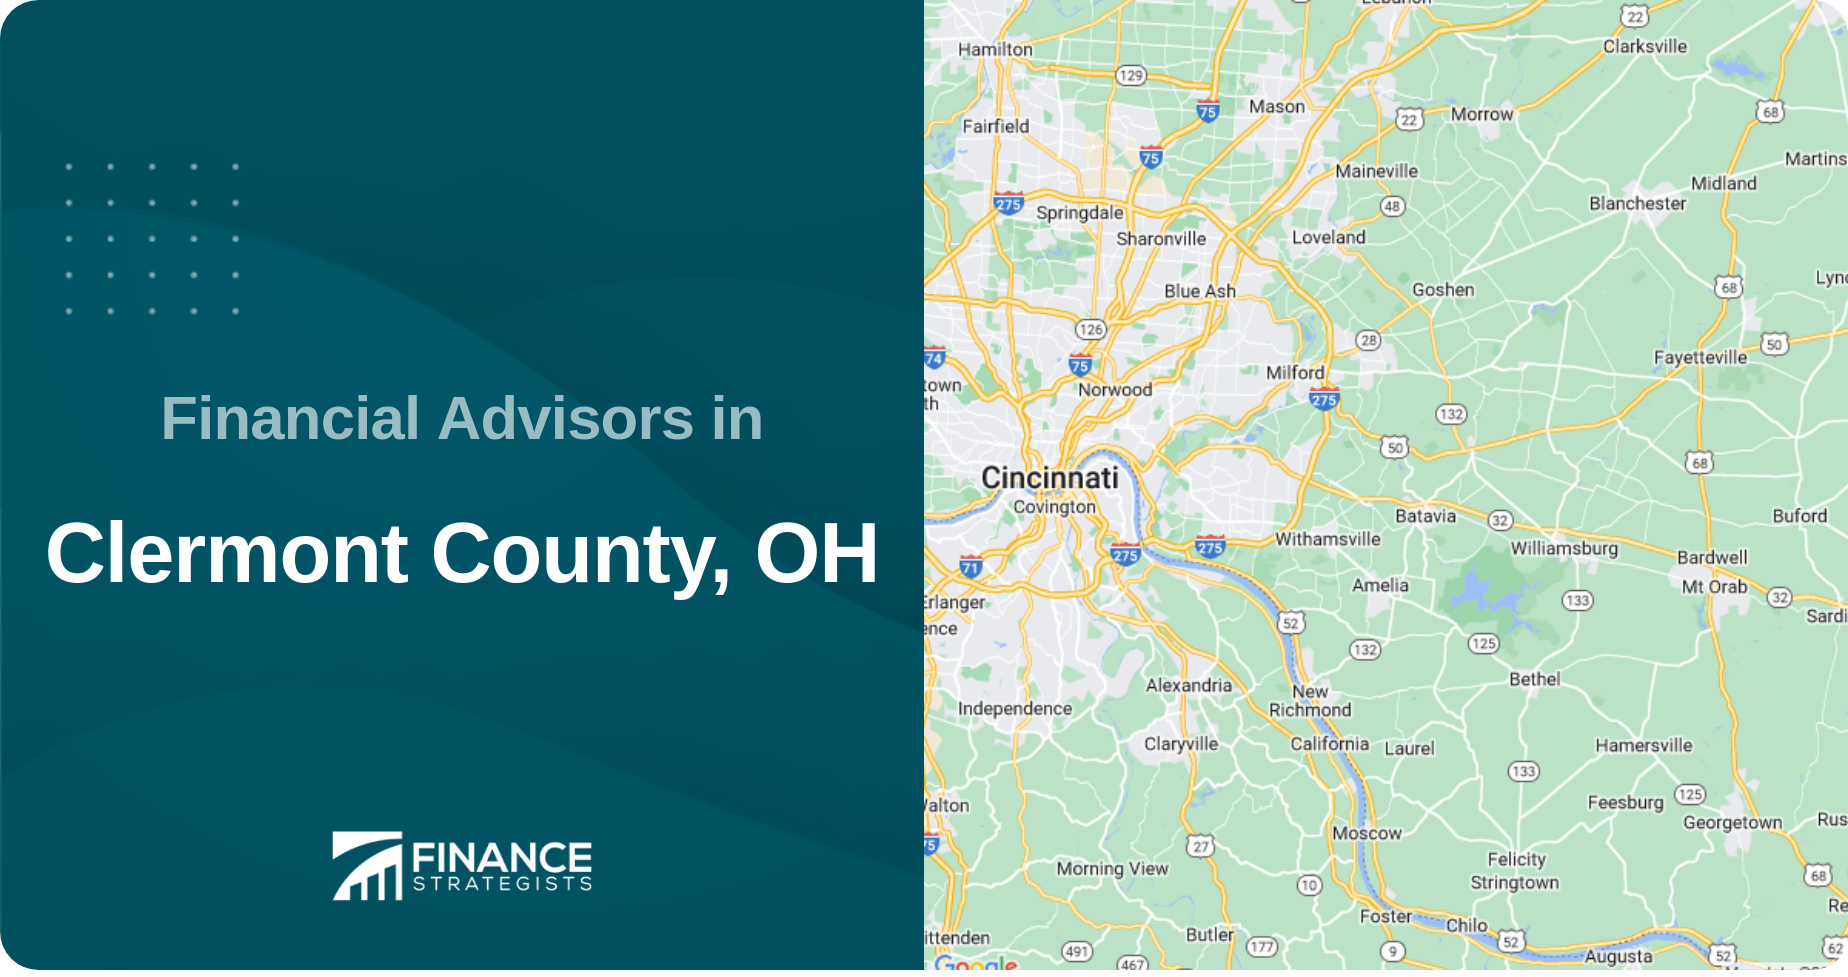 Financial Advisors in Clermont County, OH